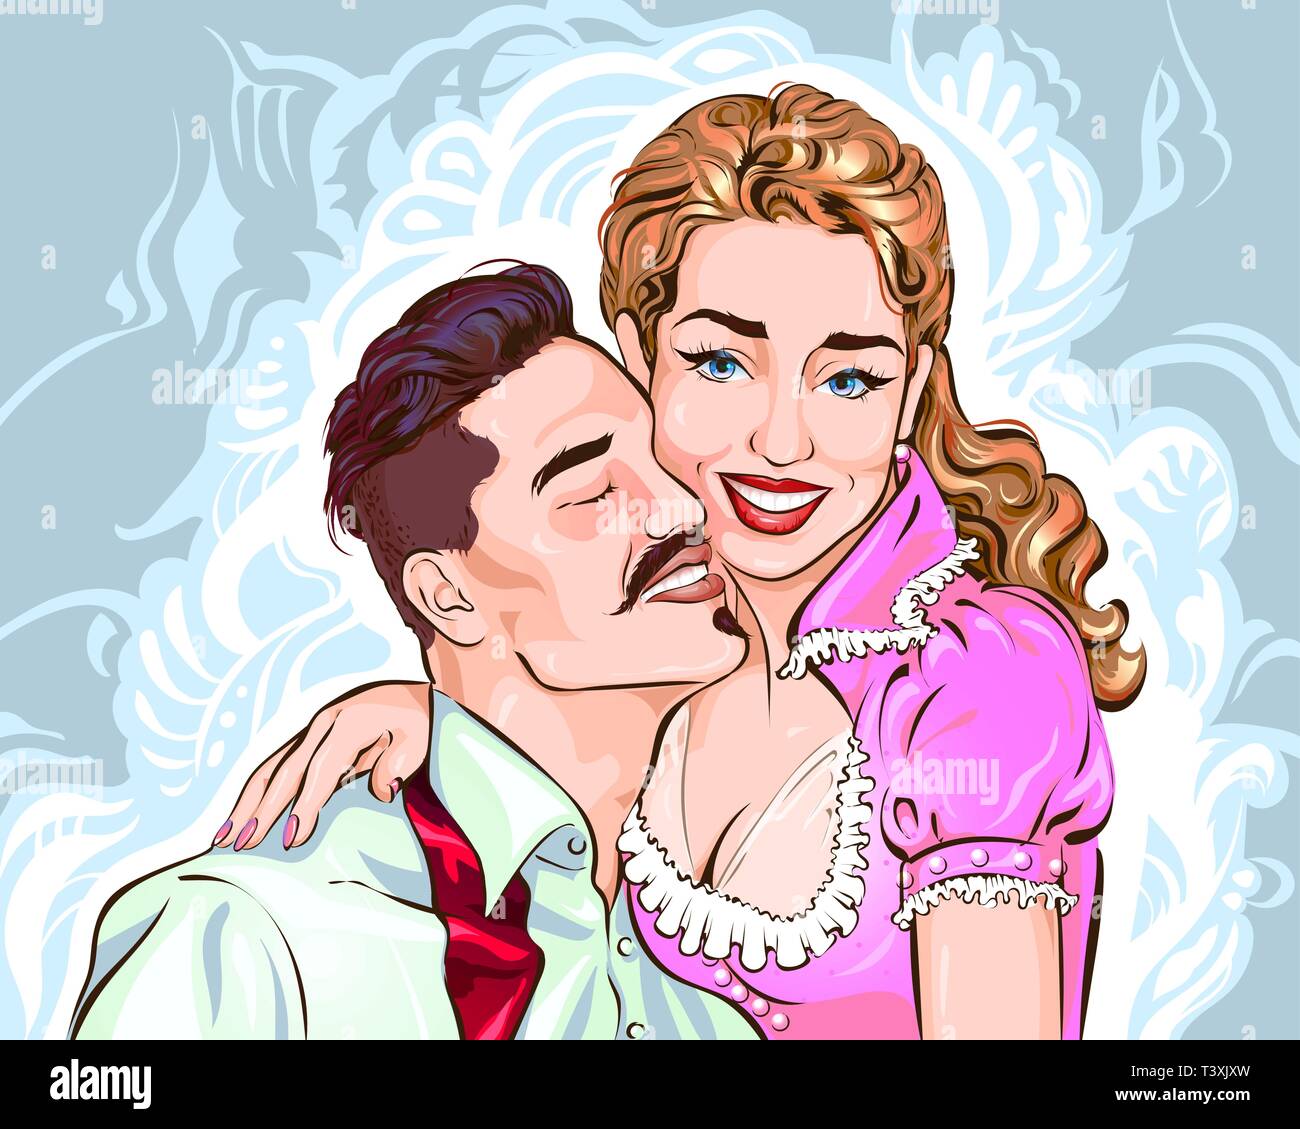 Illustration of loving couple in historical style Stock Vector